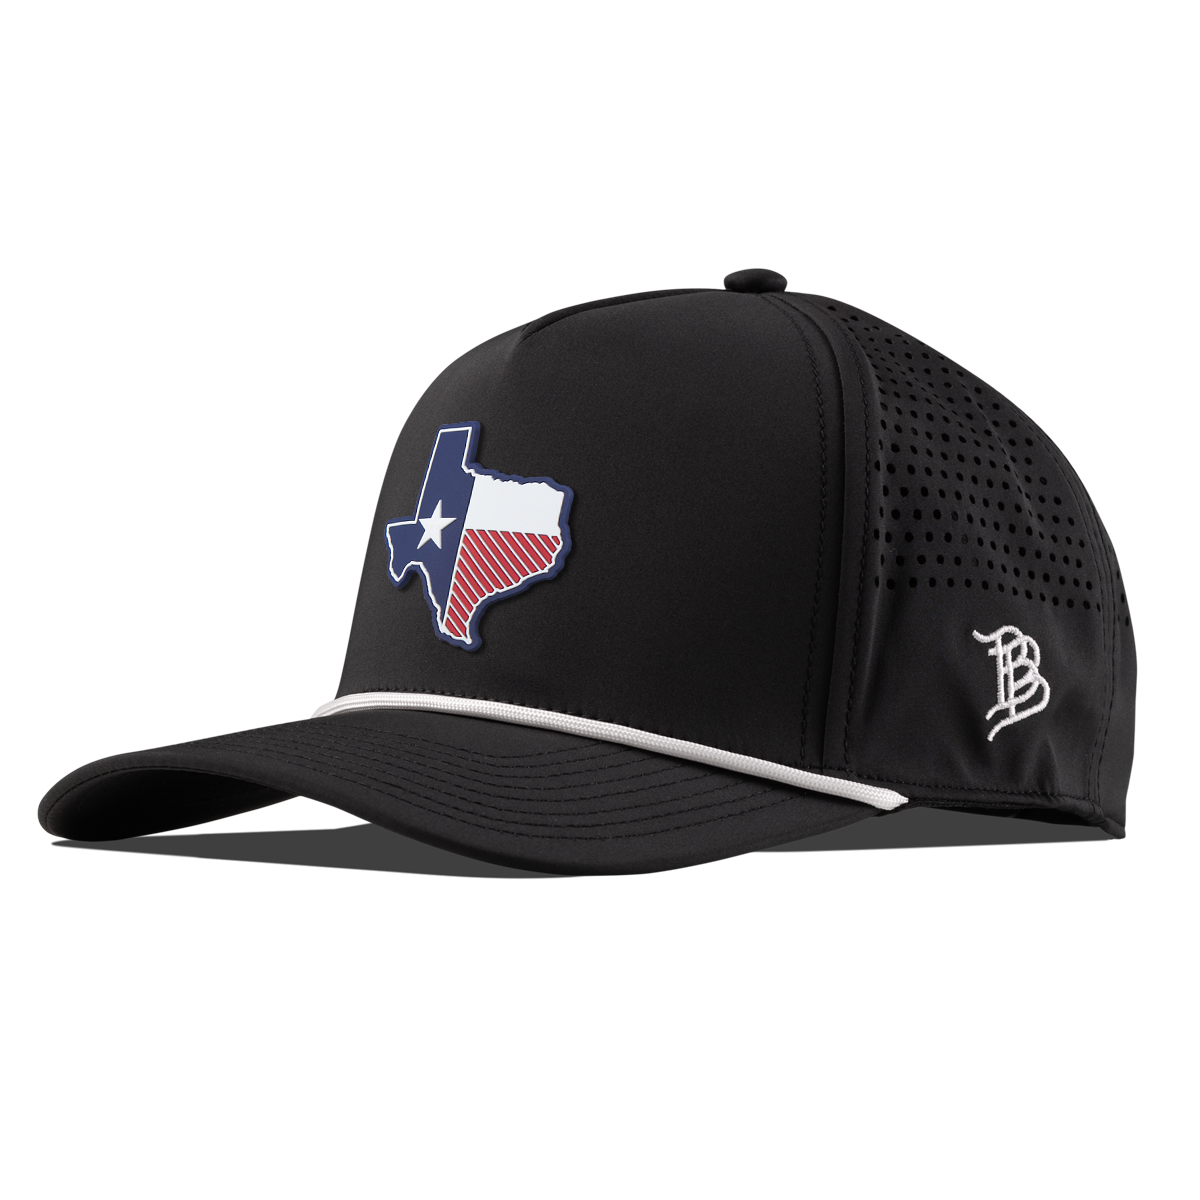 Texas Patriot Series Curved 5 Panel Rope